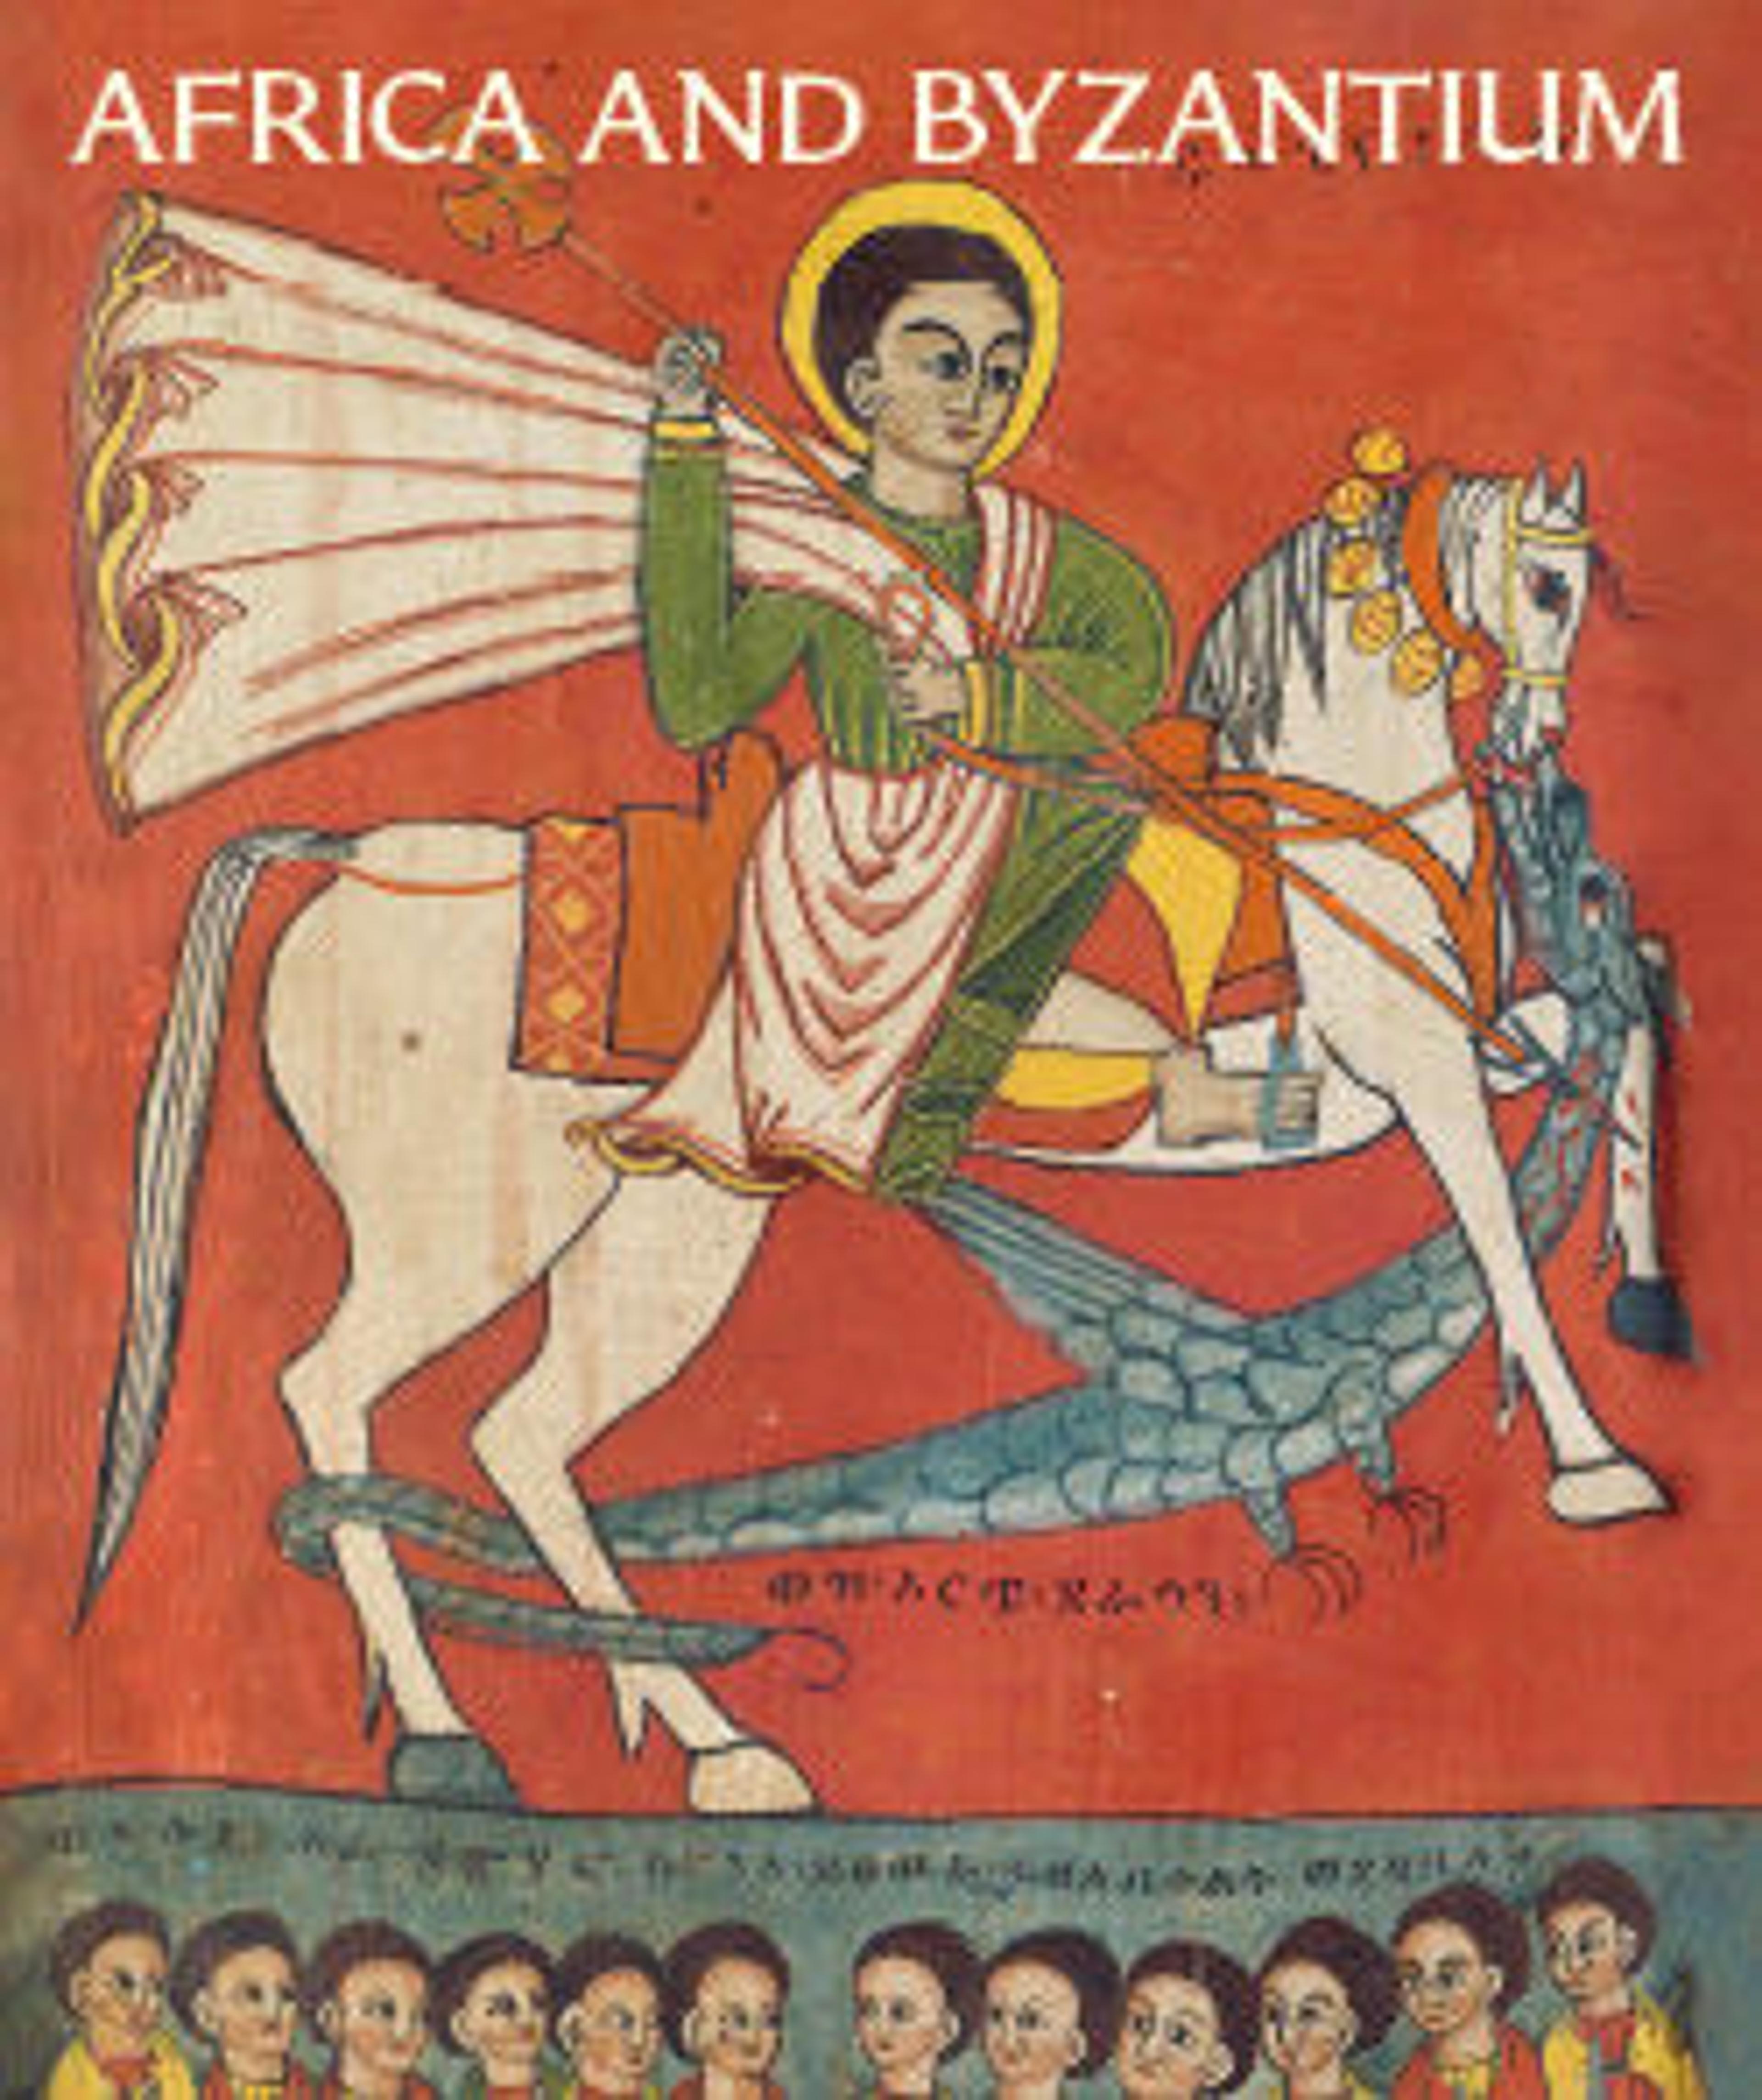 Africa and Byzantium publication record cover